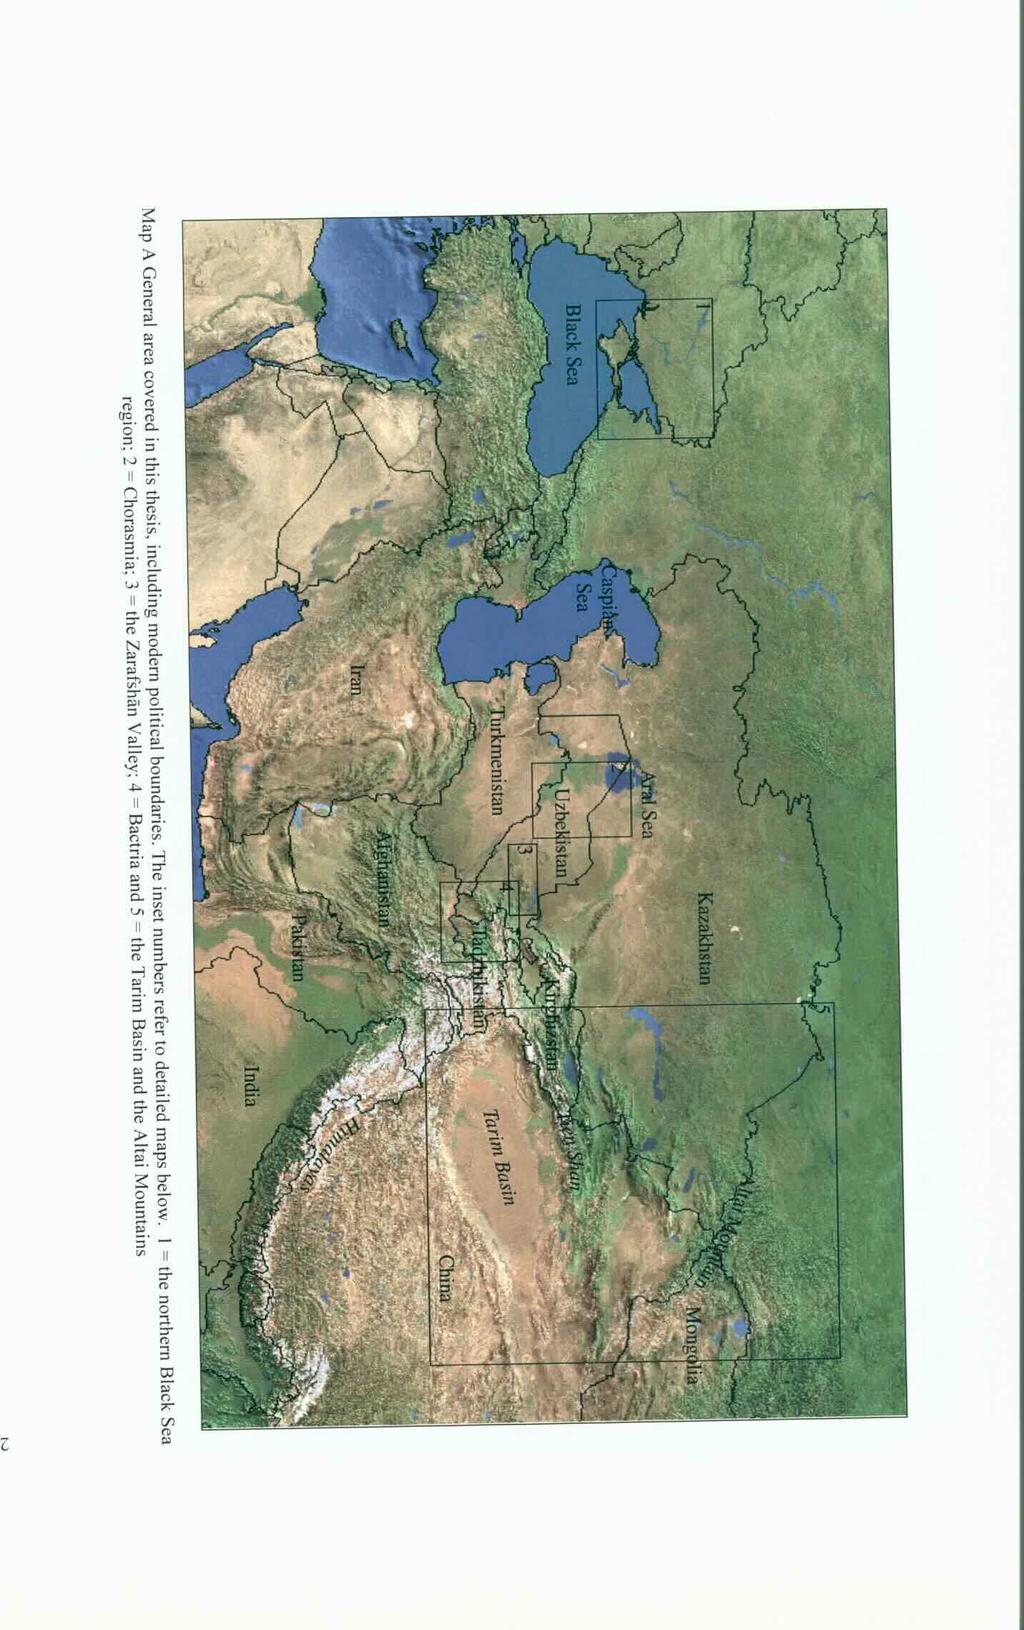 fari'" sas'" Map A General area covered in thi s thesis. including modem political boundaries.